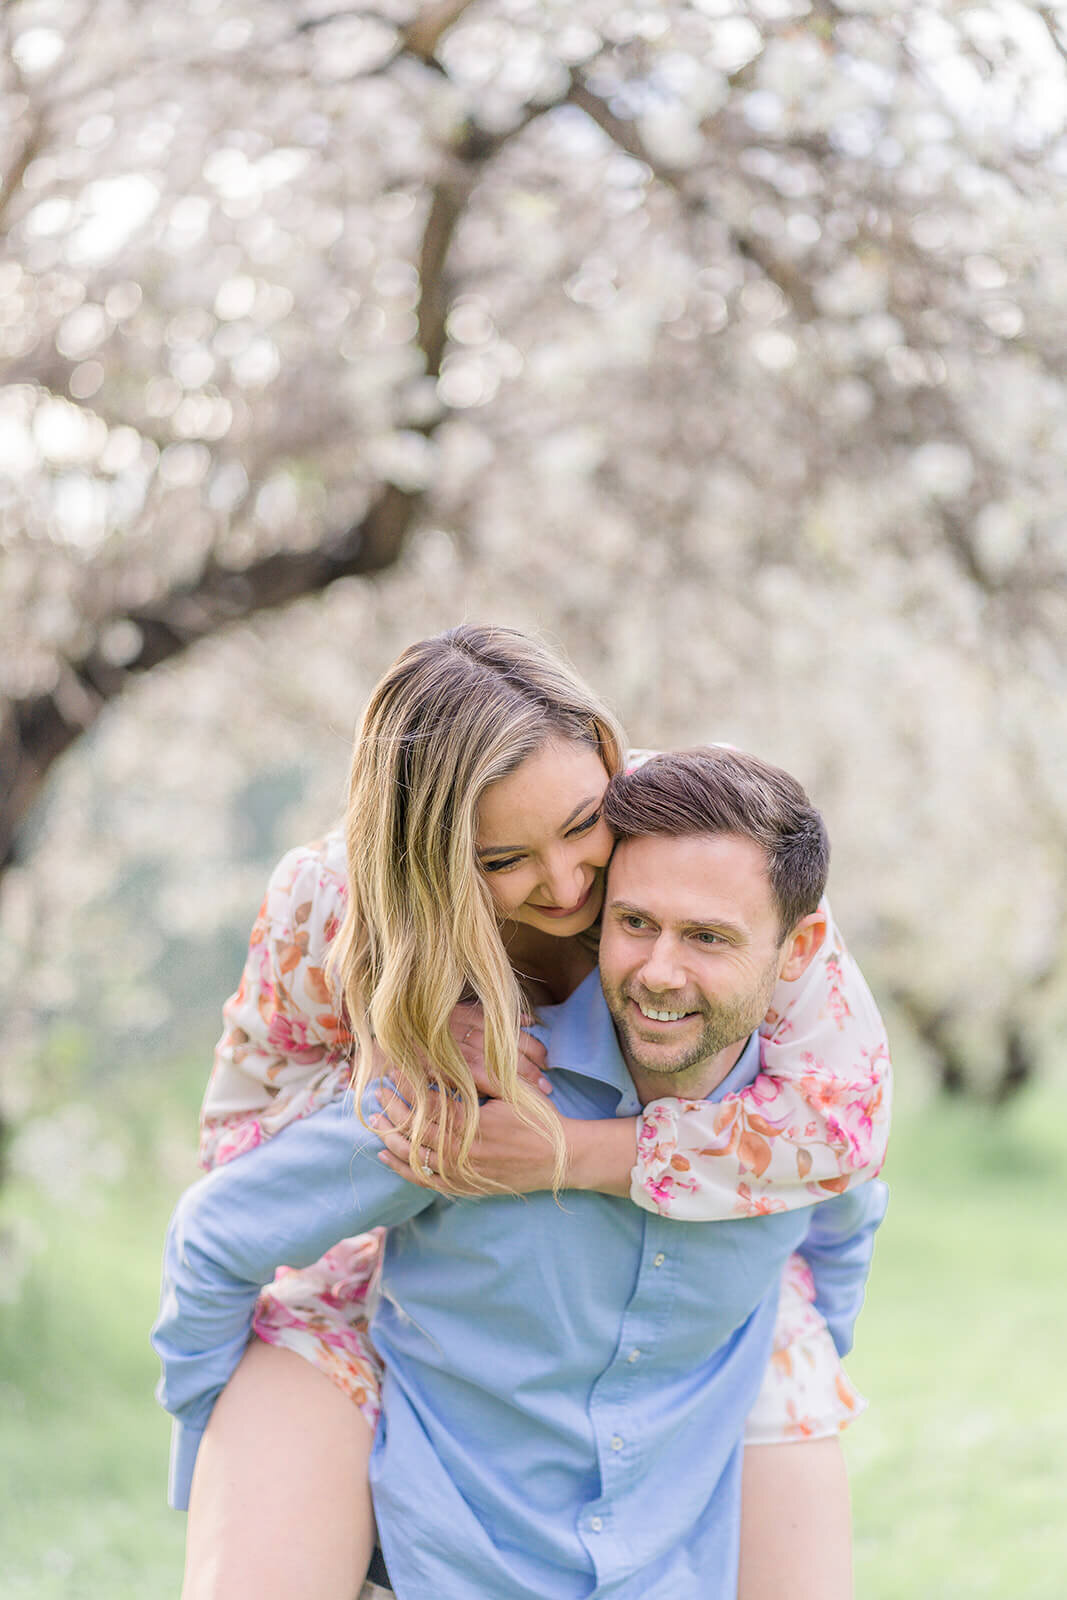 Brisbane experience enchantment in full bloom with our dreamy Adelaide almond blossom photoshoot for couples.